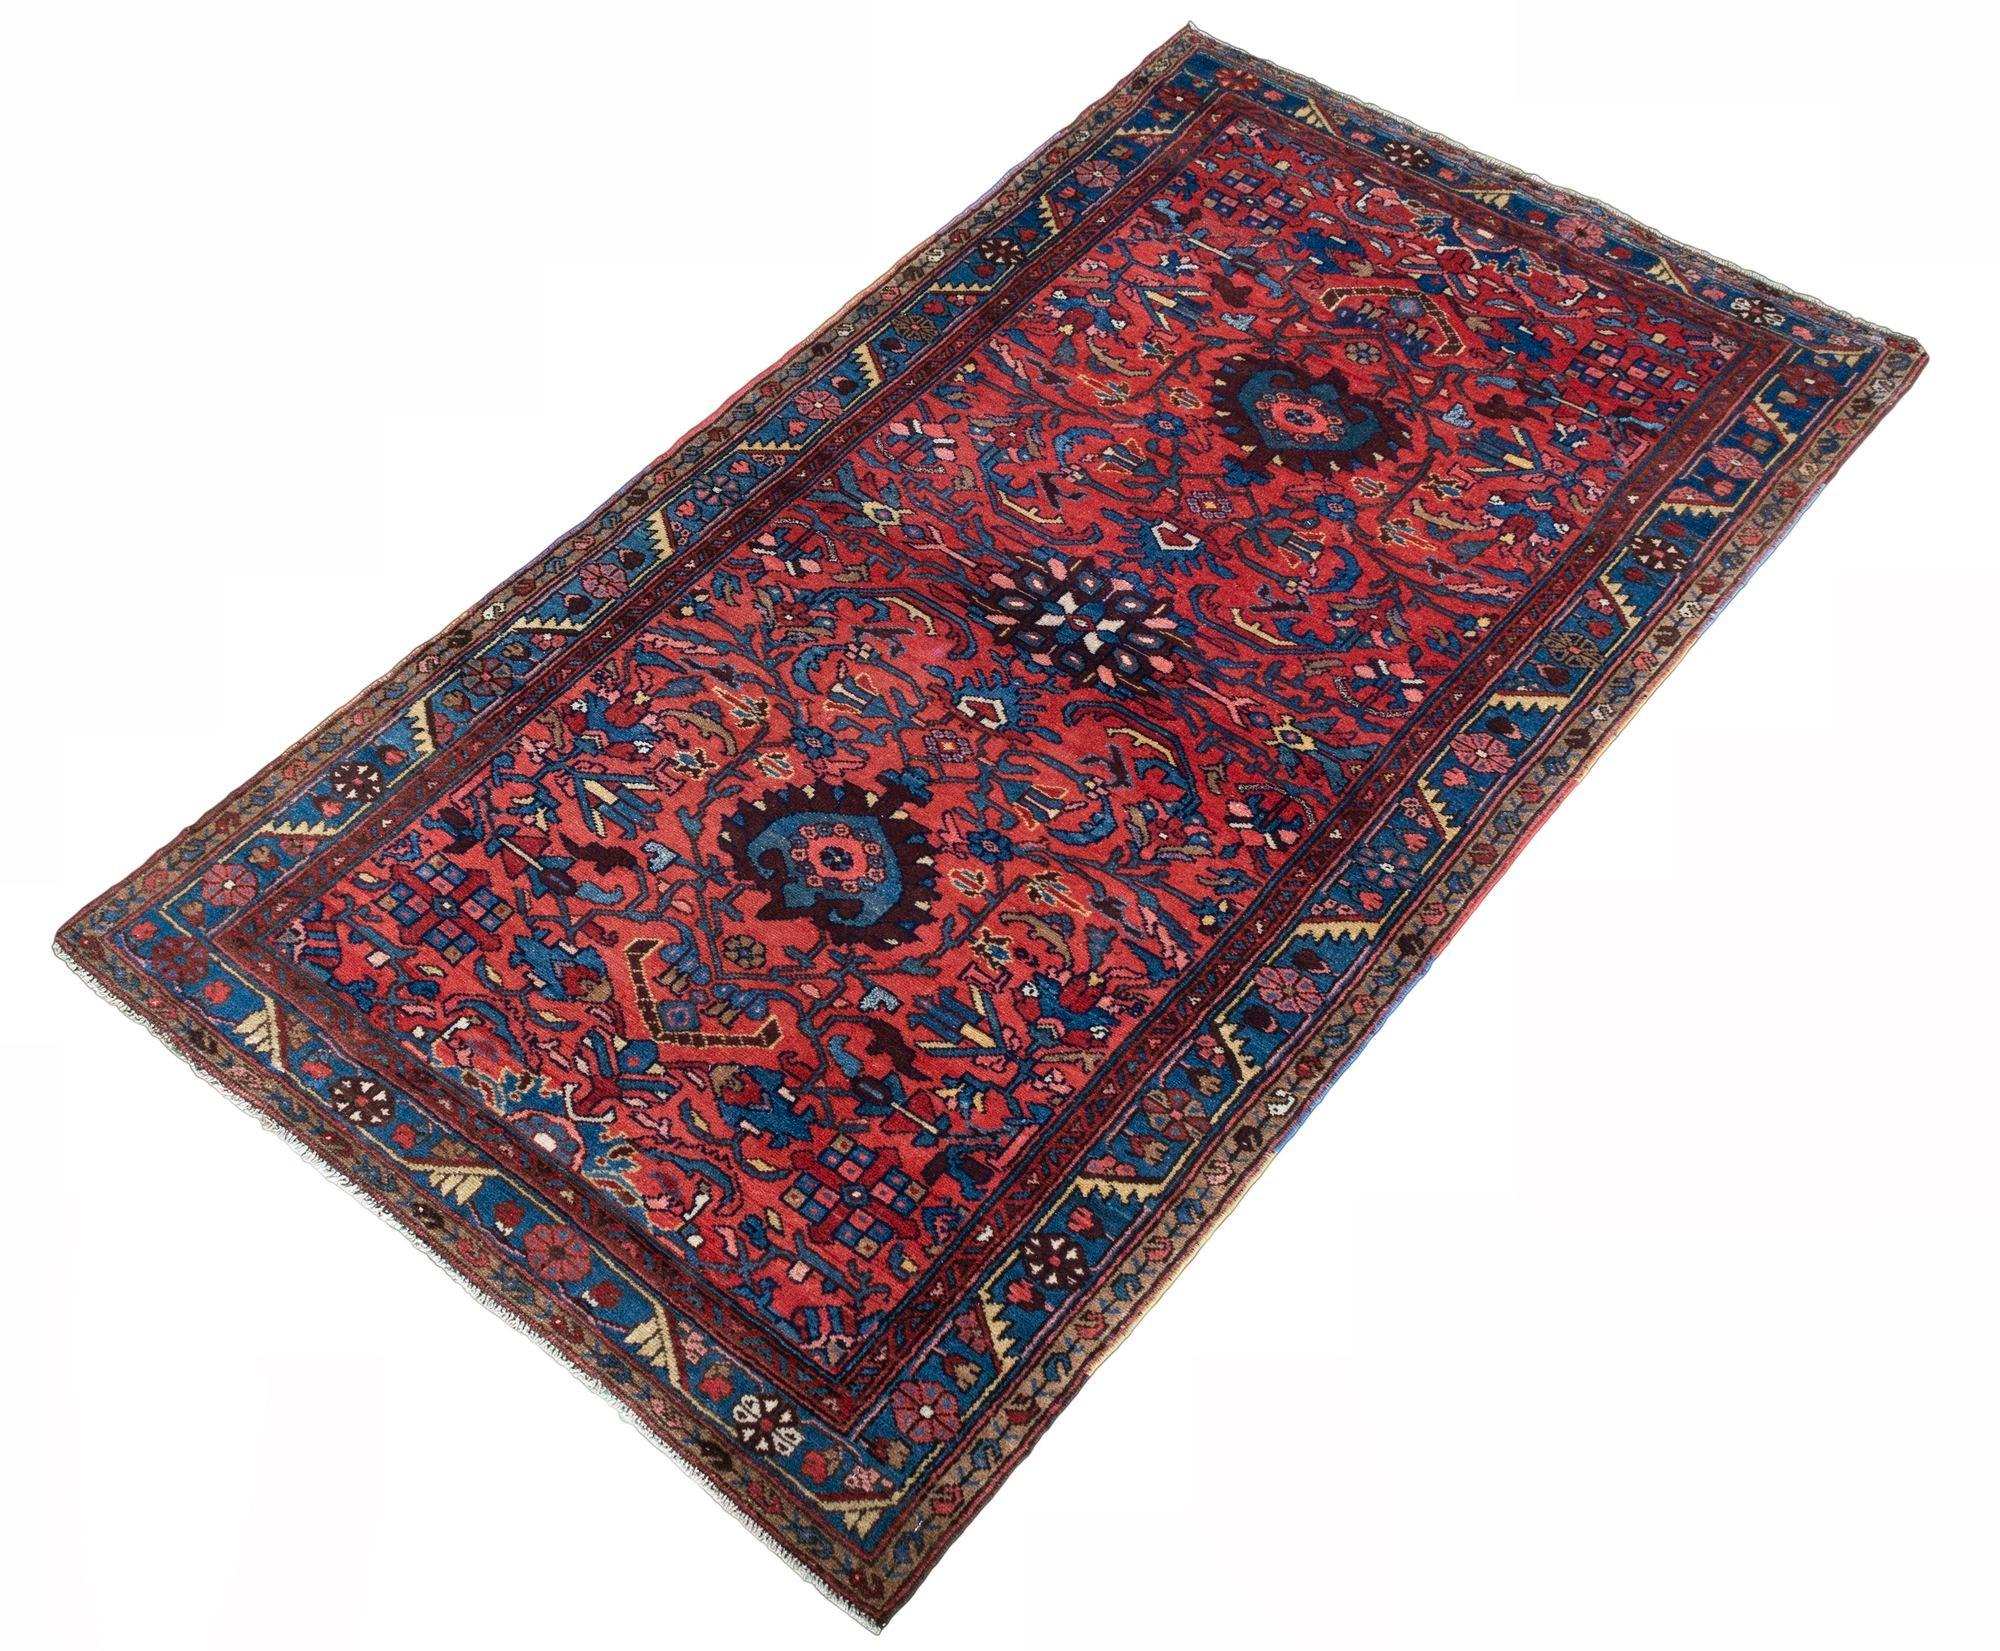 A beautiful antique Hamadan rug, hand woven circa 1920 with a floral design on a pinky red field and indigo border. Wonderful secondary colours of blues and golds and a highly decorative antique rug.
Size: 1.96m x 1.05m (6ft 6in x 3ft 6in)
This